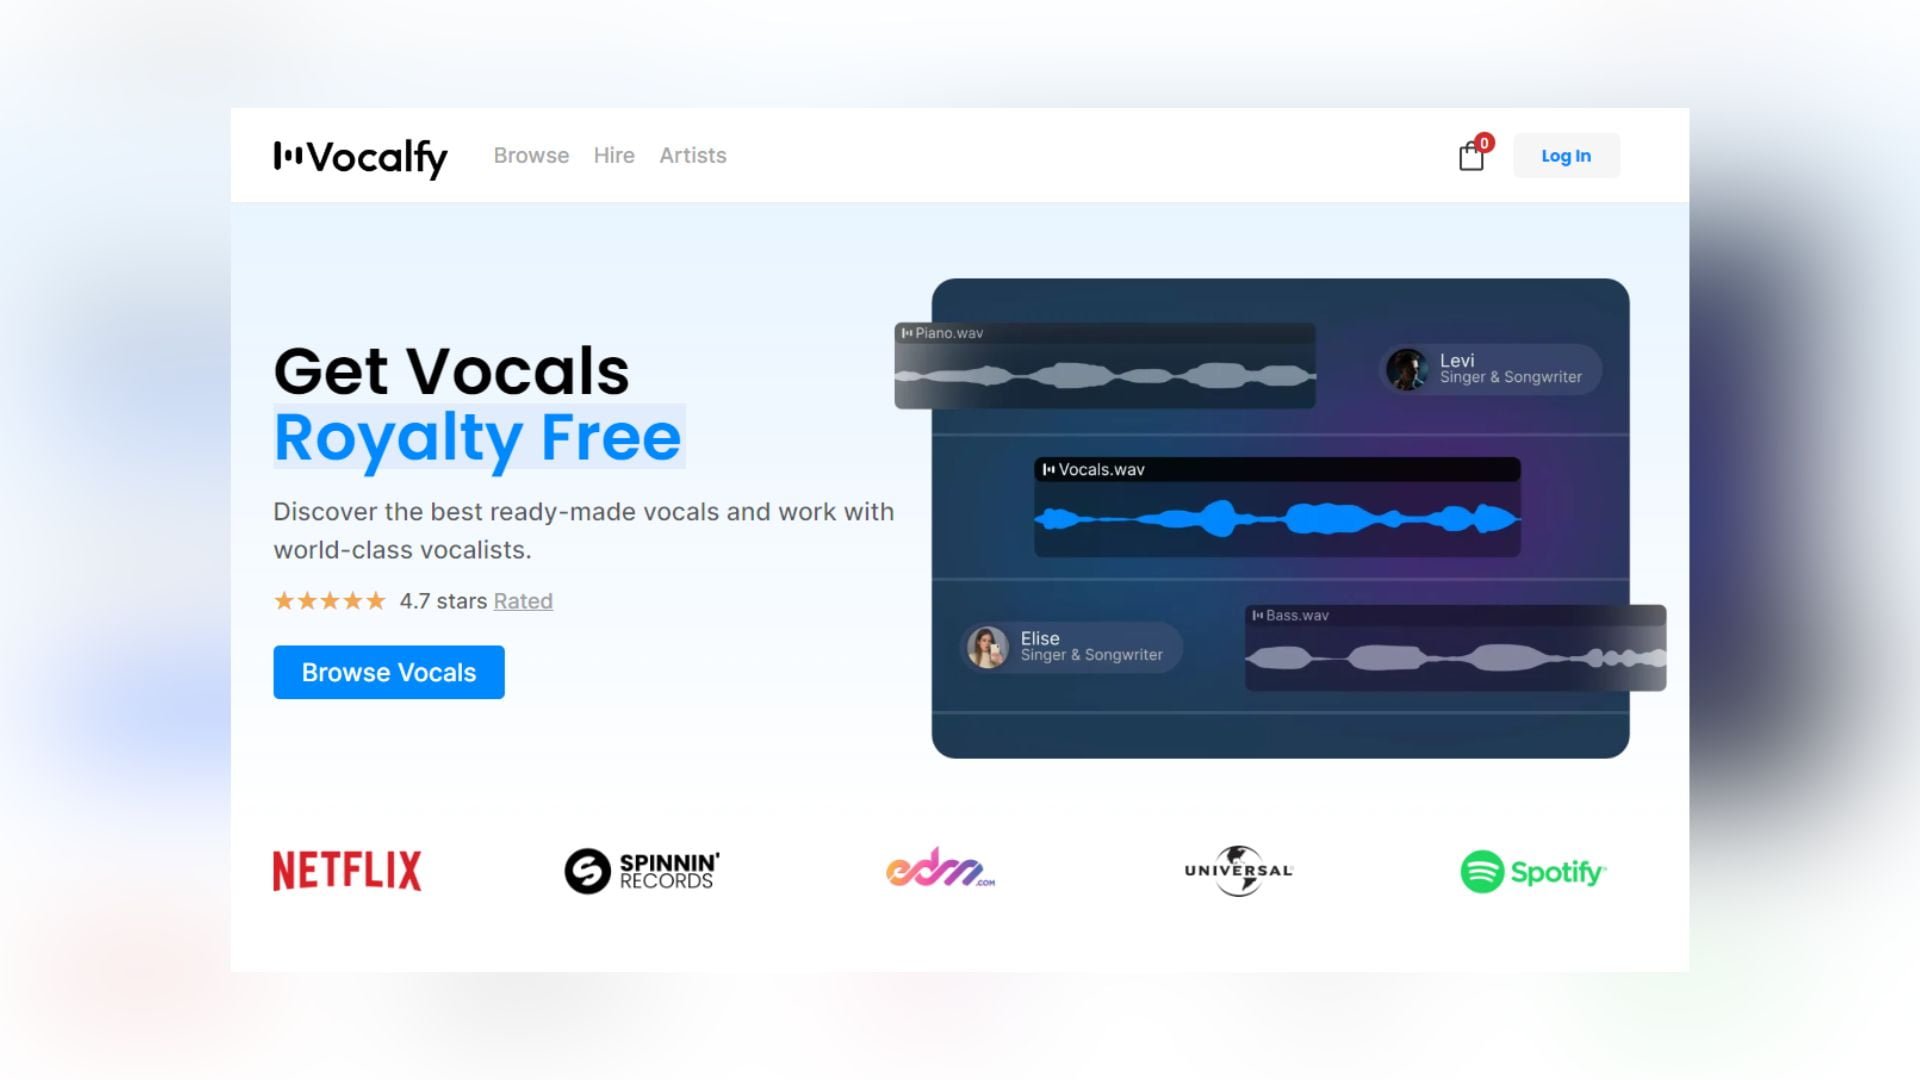 Tired of Overused Vocals? Vocalfy Offers Curated, Royalty-Free Toplines